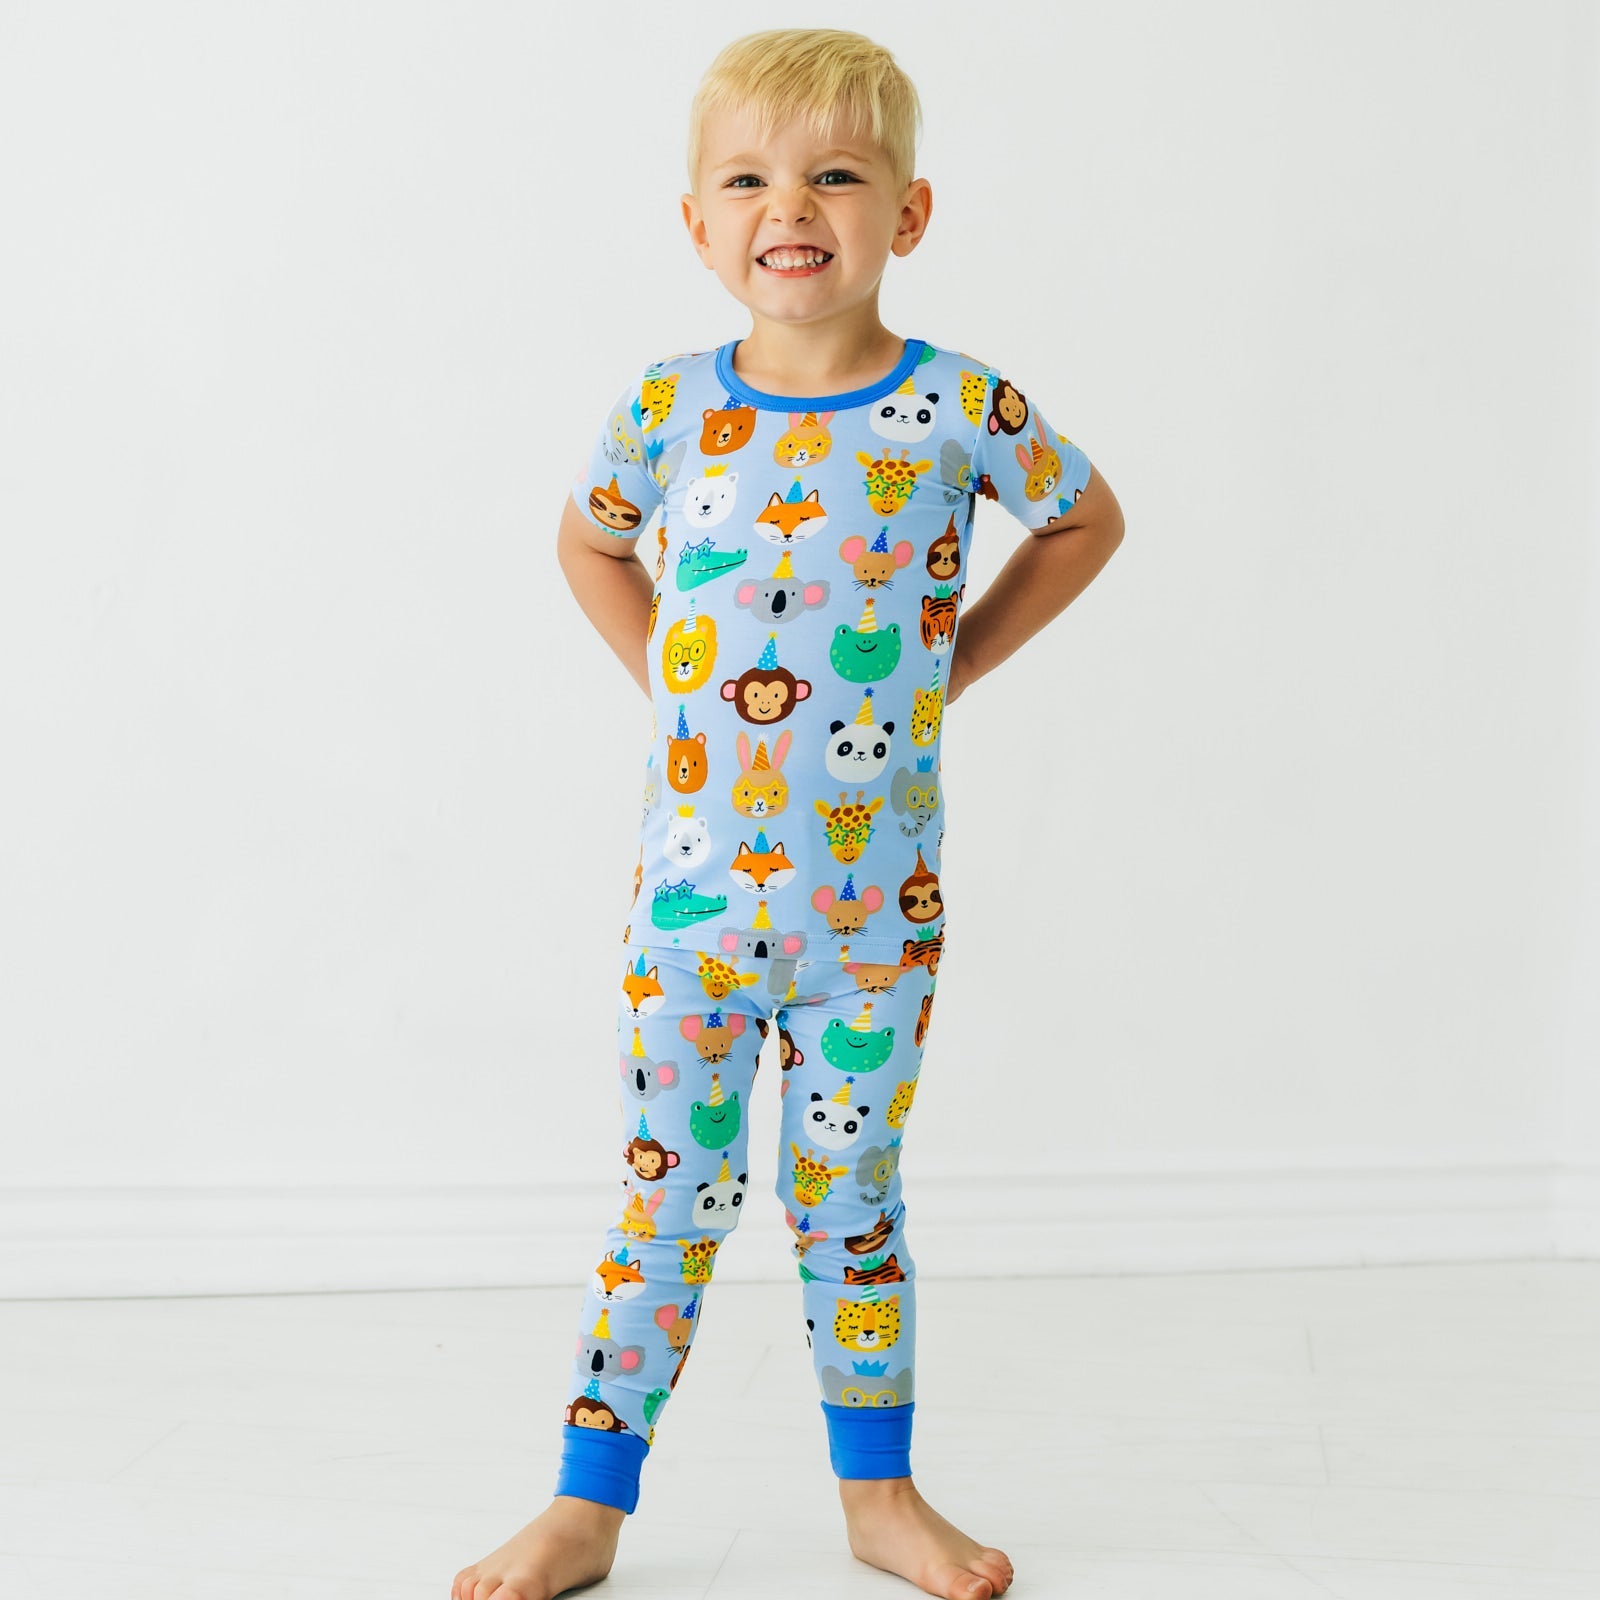 Child posing wearing a Blue Party Pals two piece short sleeve pj set